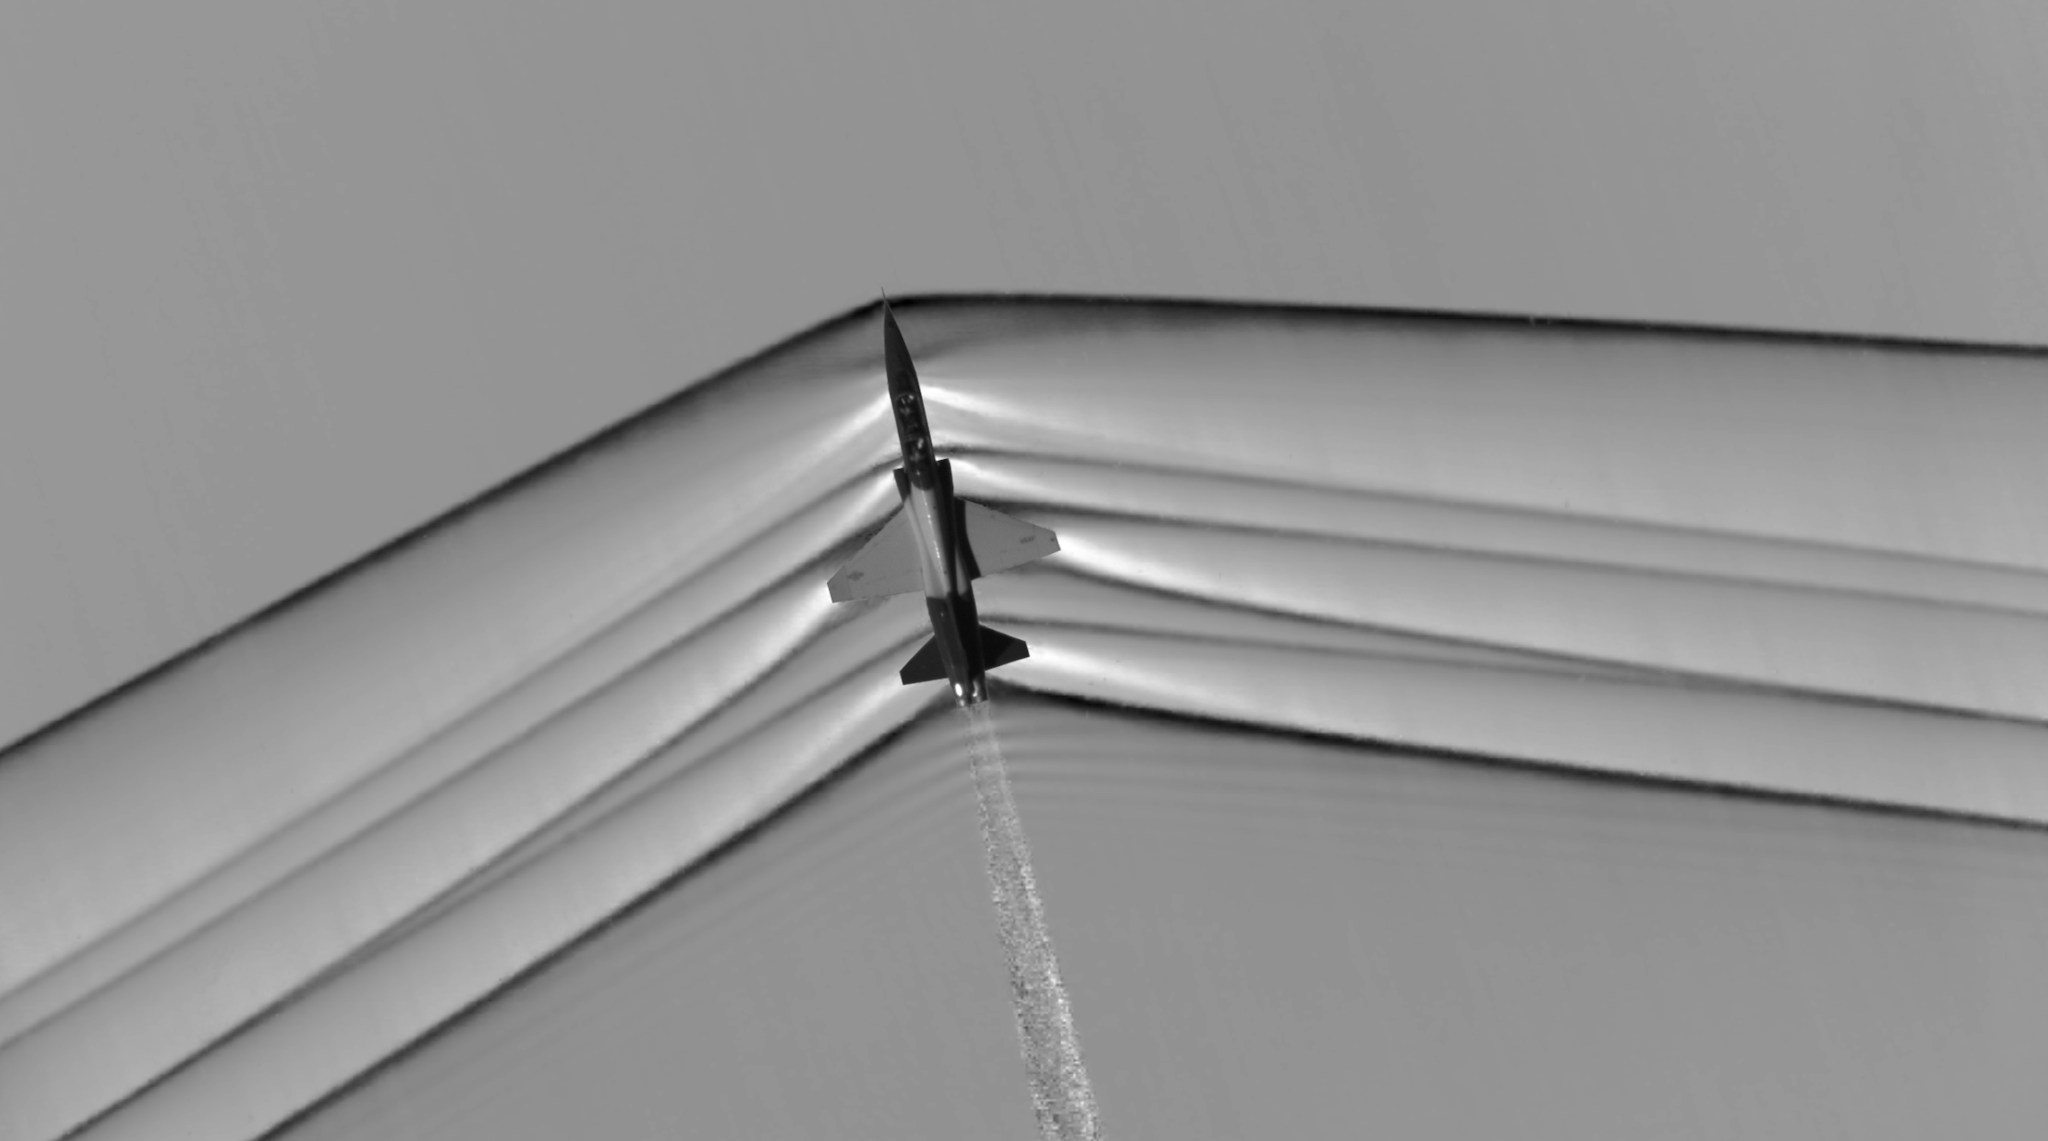 This schlieren image dramatically displays the shock wave of a supersonic jet.